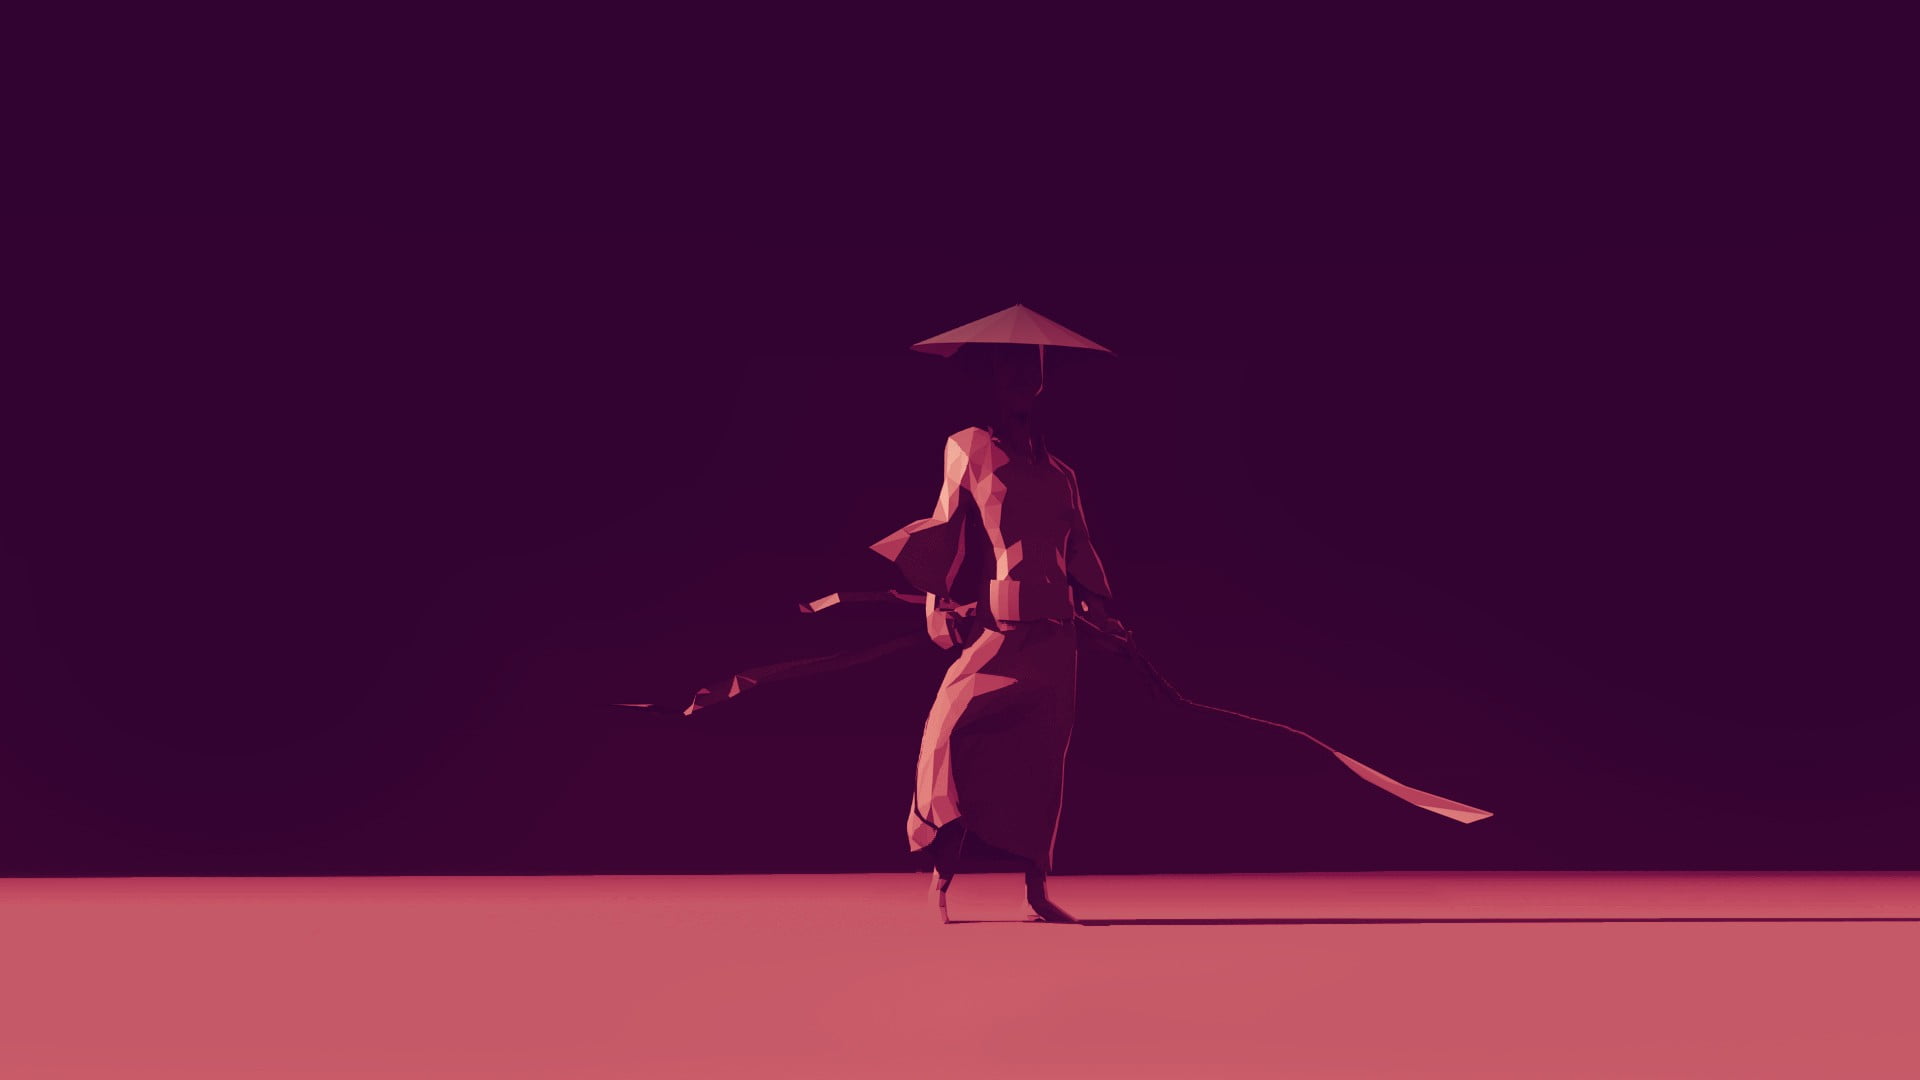 silhouette of person, artwork, low poly, one person, full length